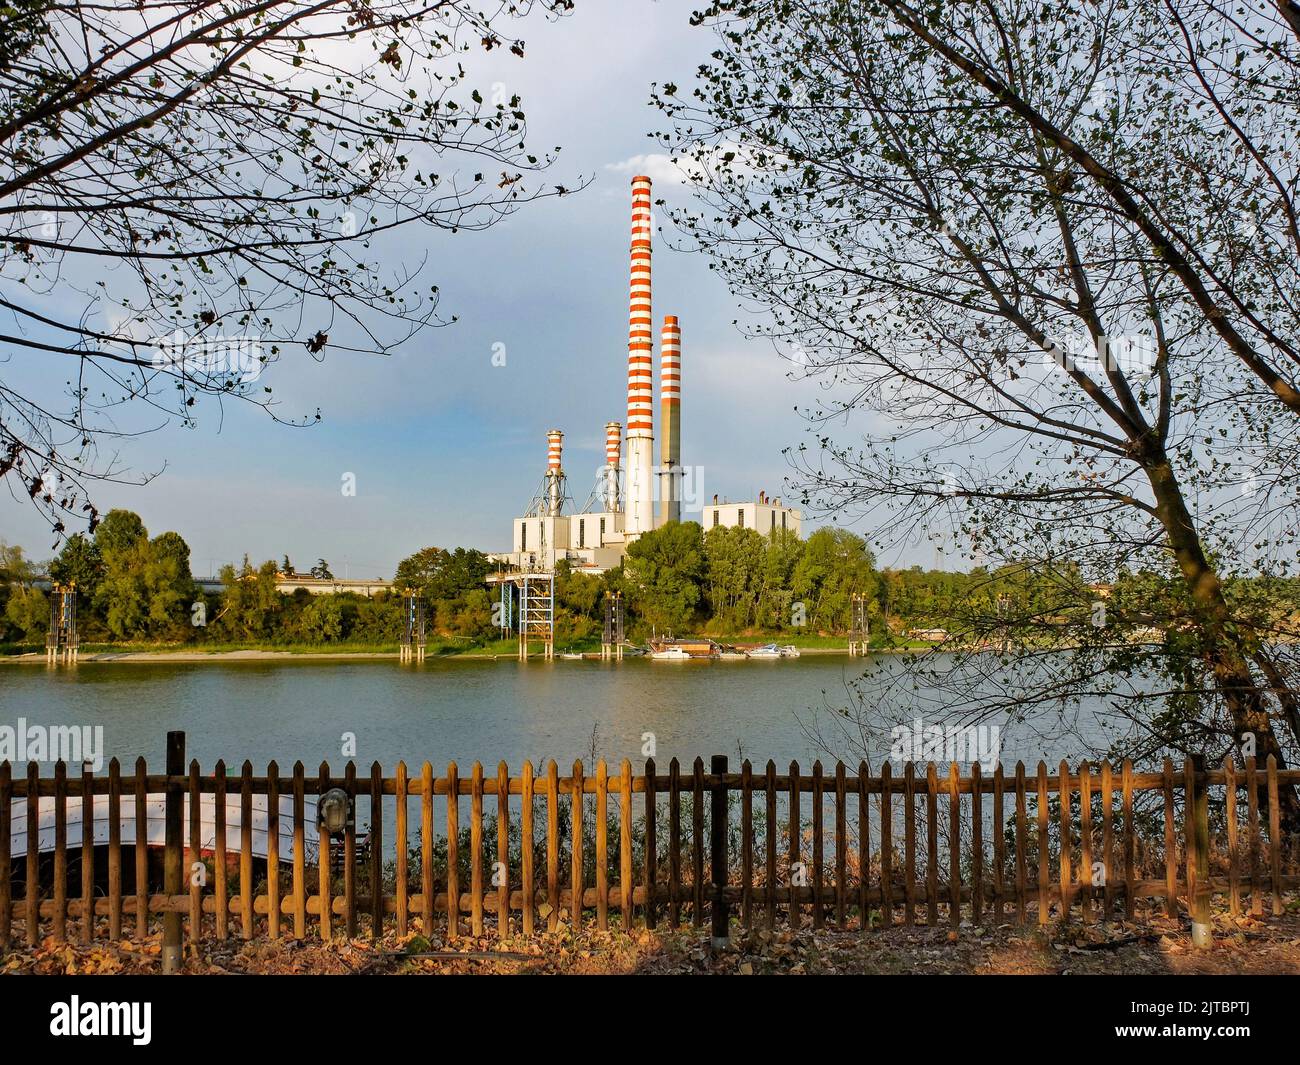 Italy, Lombardy. Thermal power plant along the banks of the Po river, Italy. Stock Photo